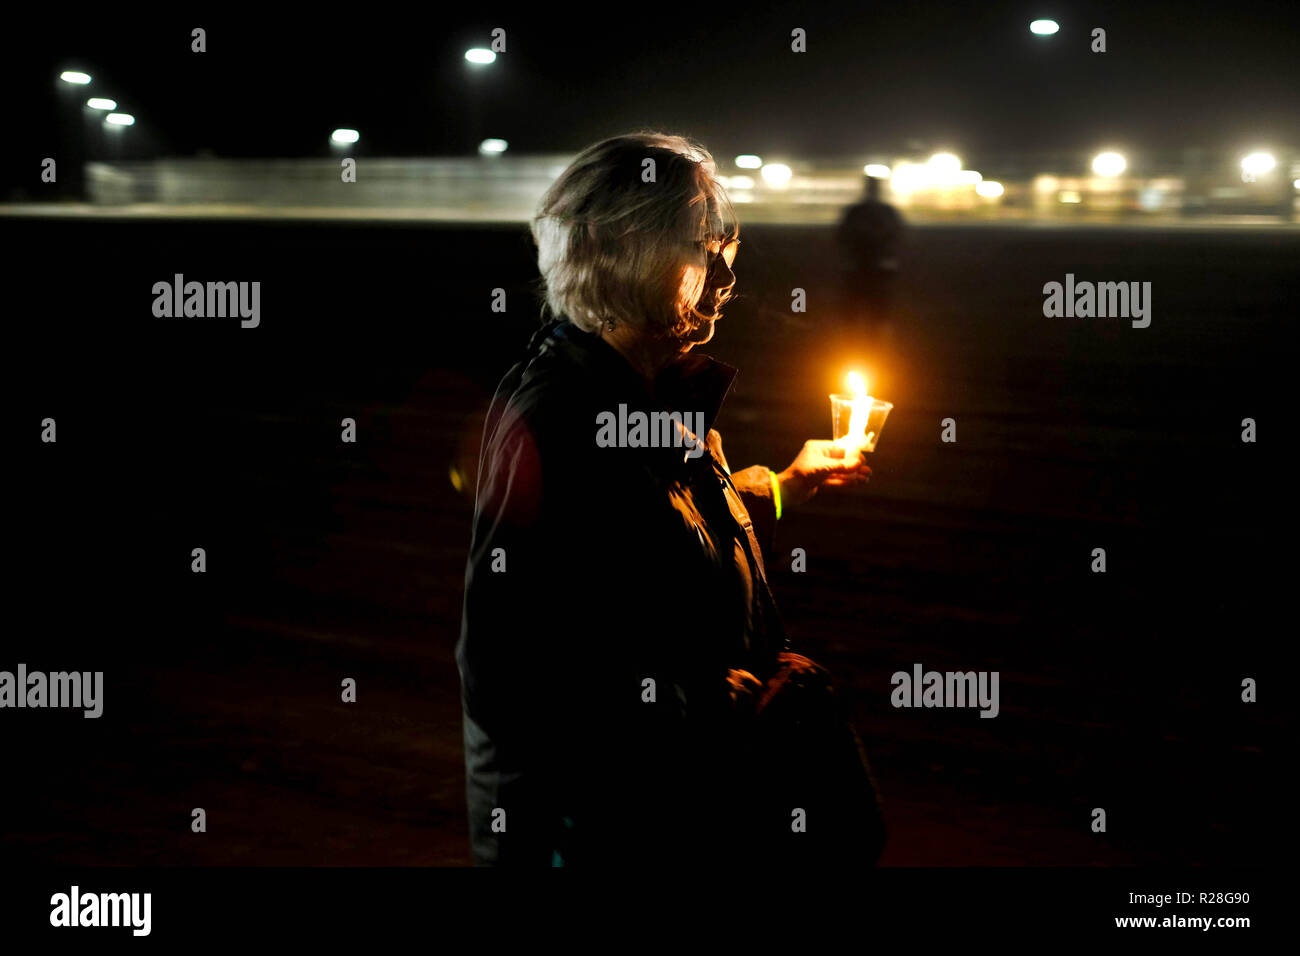 Eloy, Arizona, USA. 16th Nov, 2018. Candlelight vigil at the Eloy Detention Center in Eloy, Arizona. Eloy is a private prison owned and operated by CoreCivic under a contract with US Immigration and Customs Enforcement. Illegal immigrants are held at the facility while they await a hearing before a judge . The protest was organized by the Puente Human Rights movement to highlight conditions at the prison and the illegal incarceration of detainees. Supporters called for the abolishment of I.C.E and rights of migrants. Credit: Christopher Brown/ZUMA Wire/Alamy Live News Stock Photo